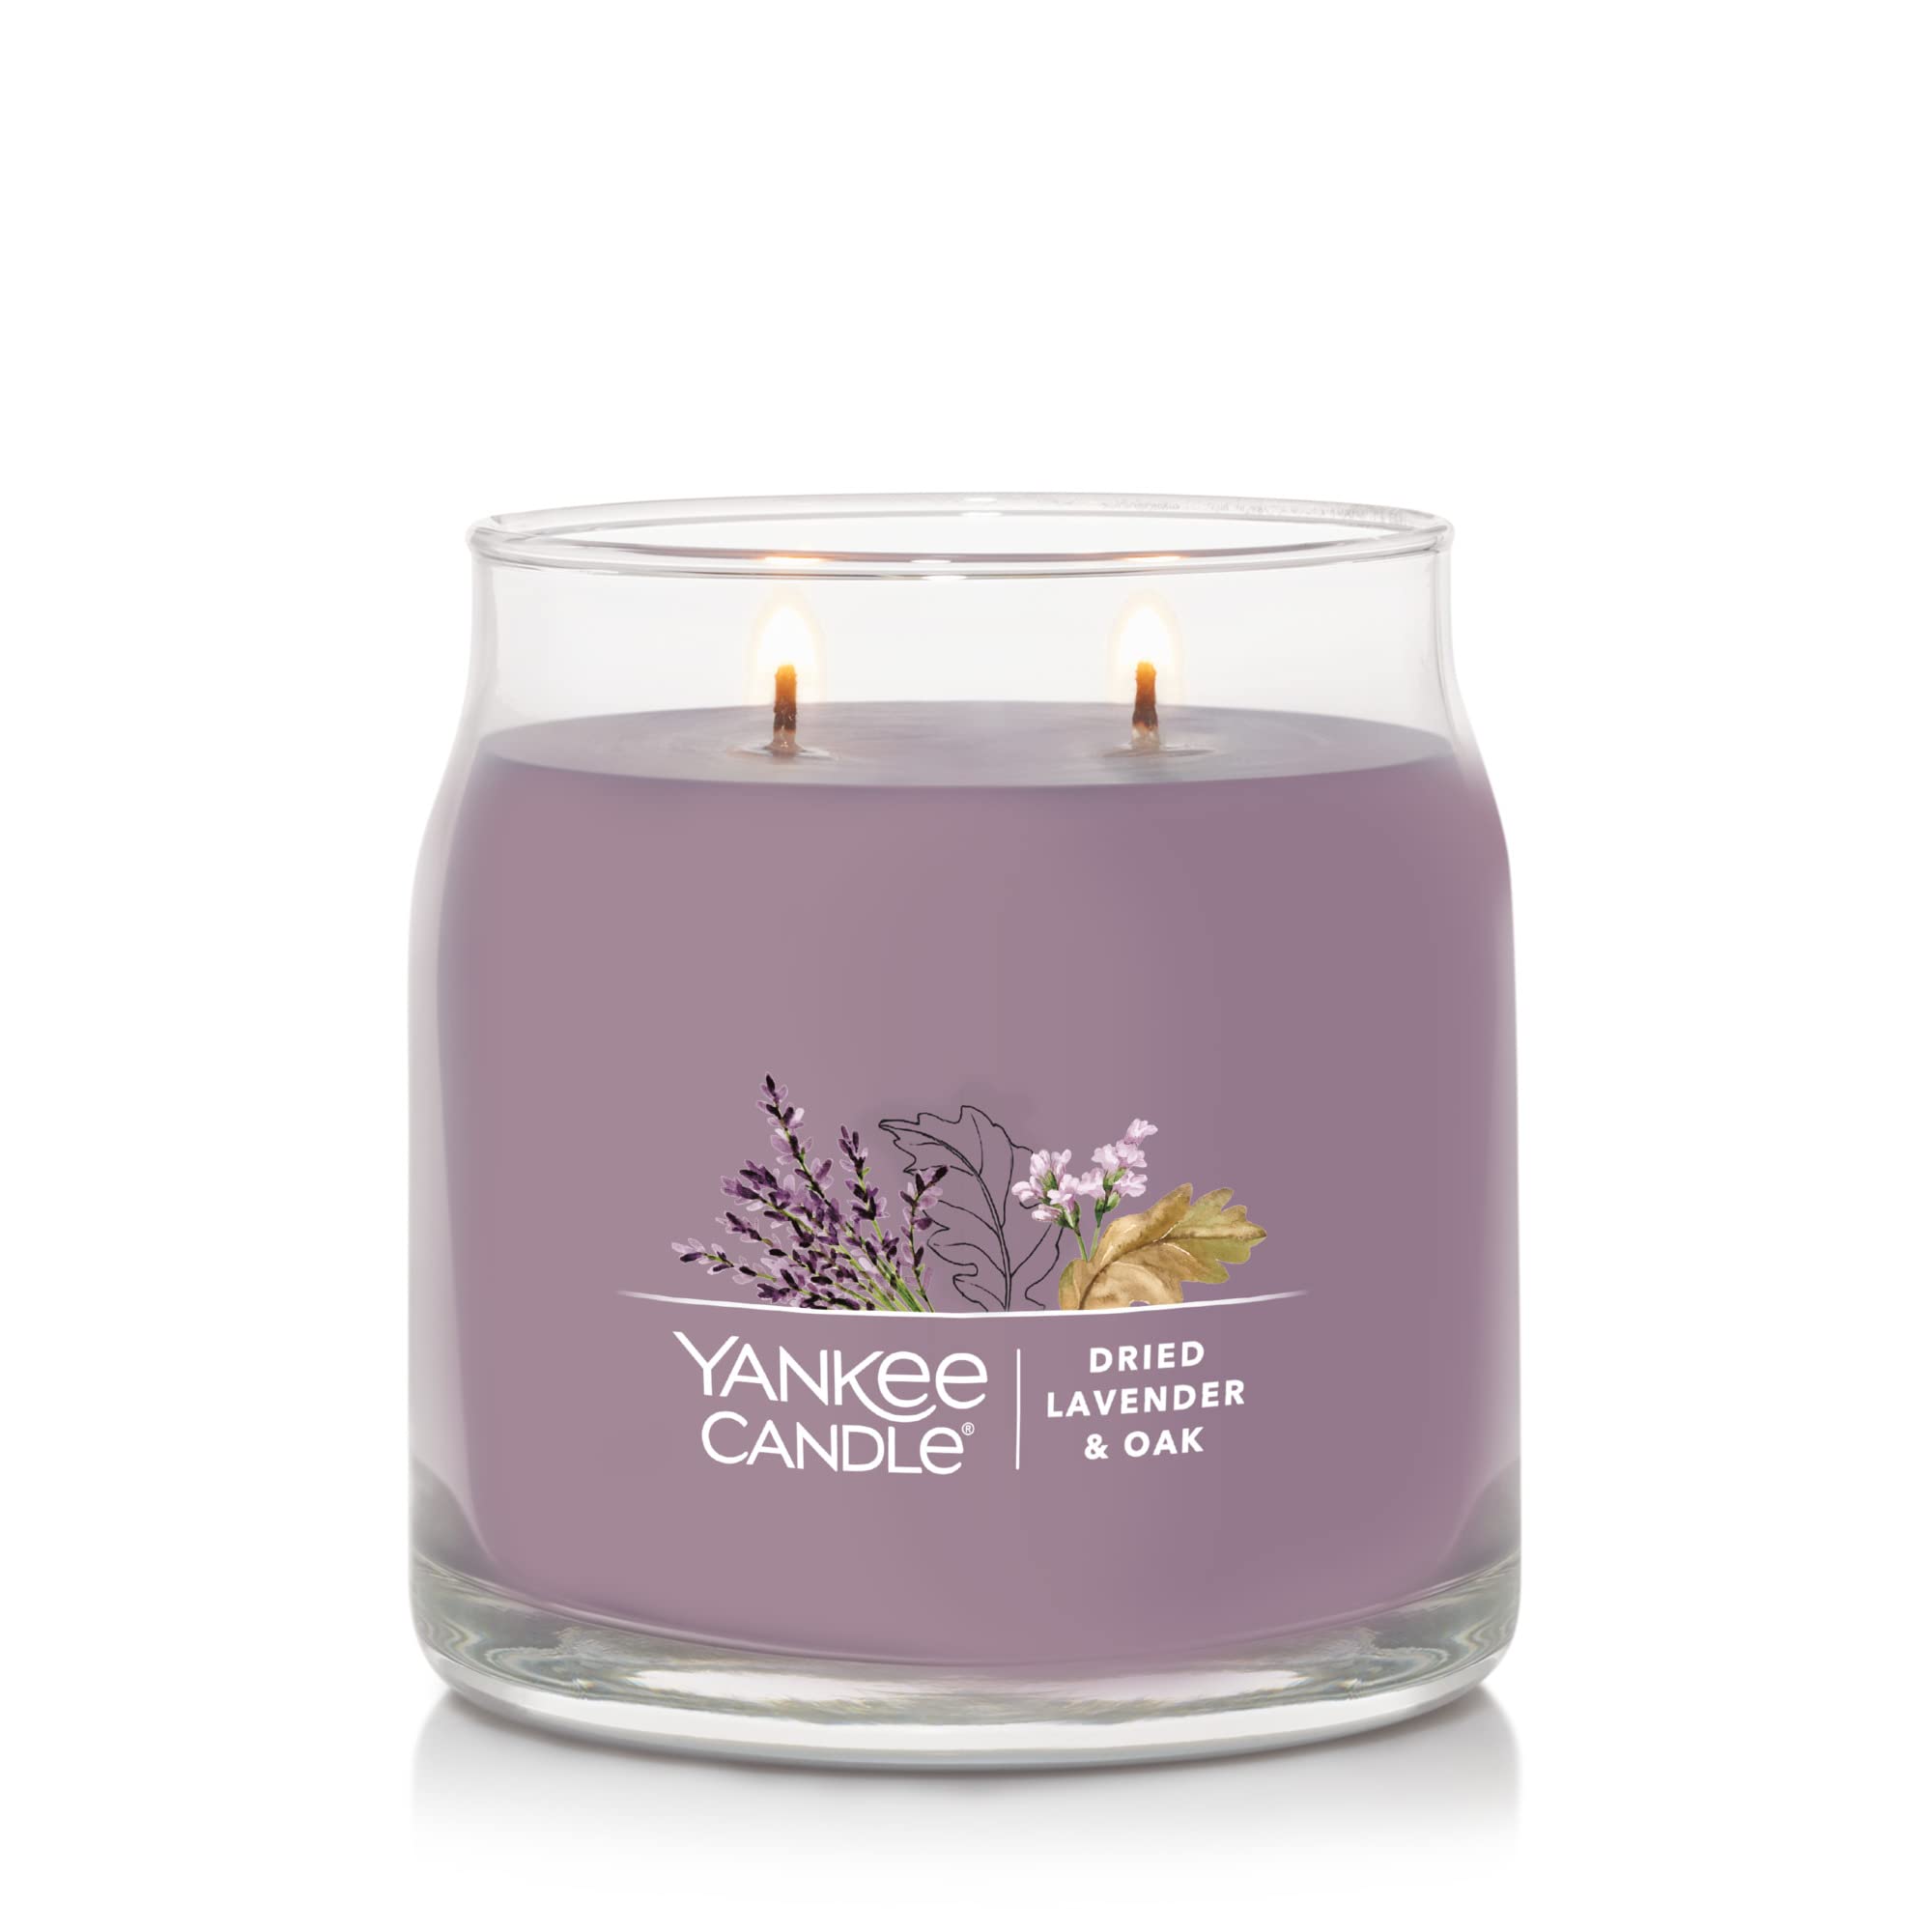 Yankee Candle Dried Lavender & Oak​ Scented, Signature 13oz Medium Jar 2-Wick Candle, Over 35 Hours of Burn Time